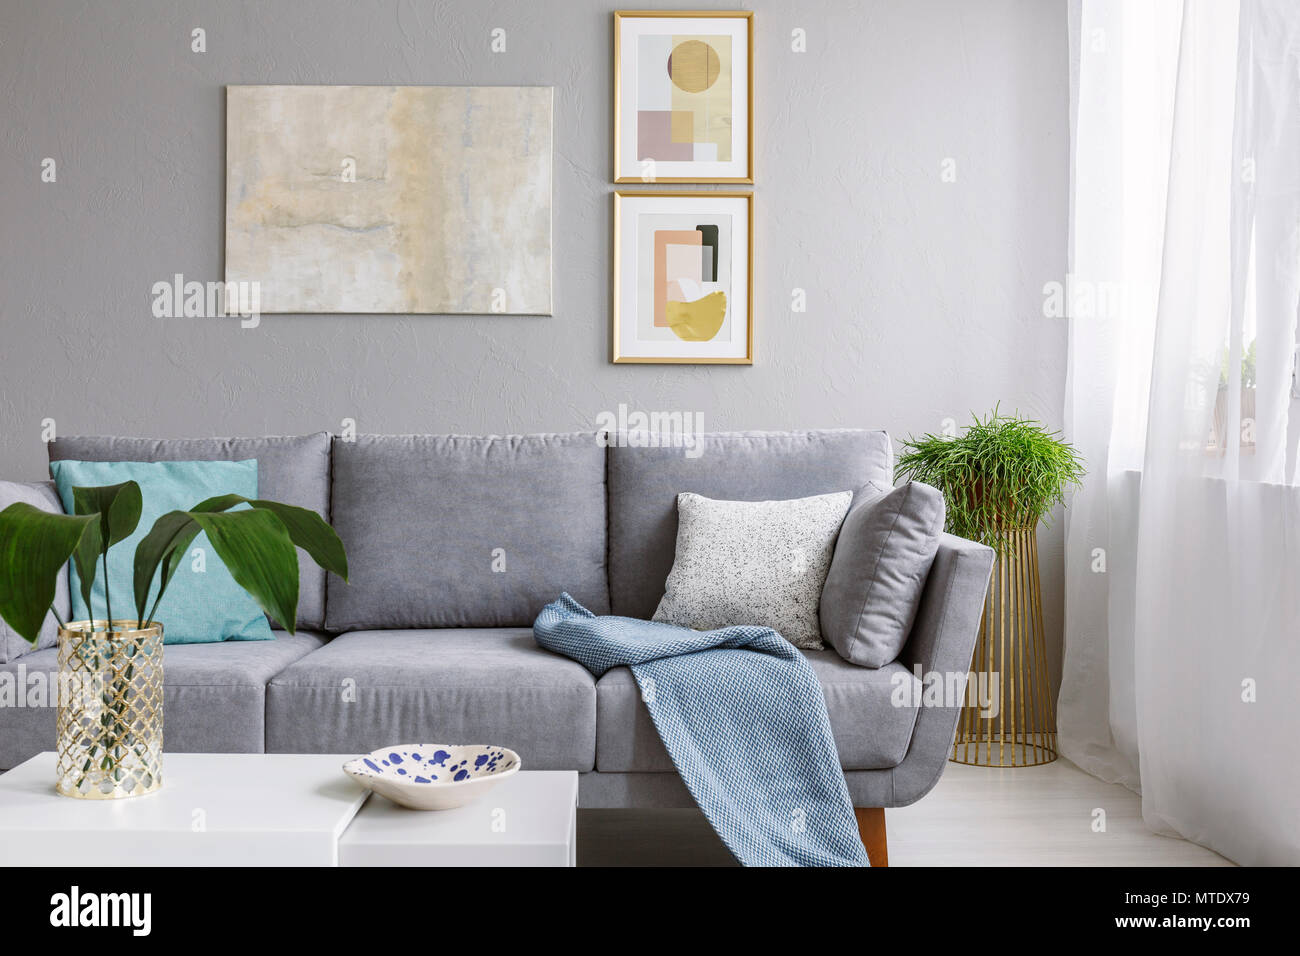 Real photo of a grey sofa standing in a stylish living room interior behind a white table with leaves and in front of a grey wall with posters Stock Photo